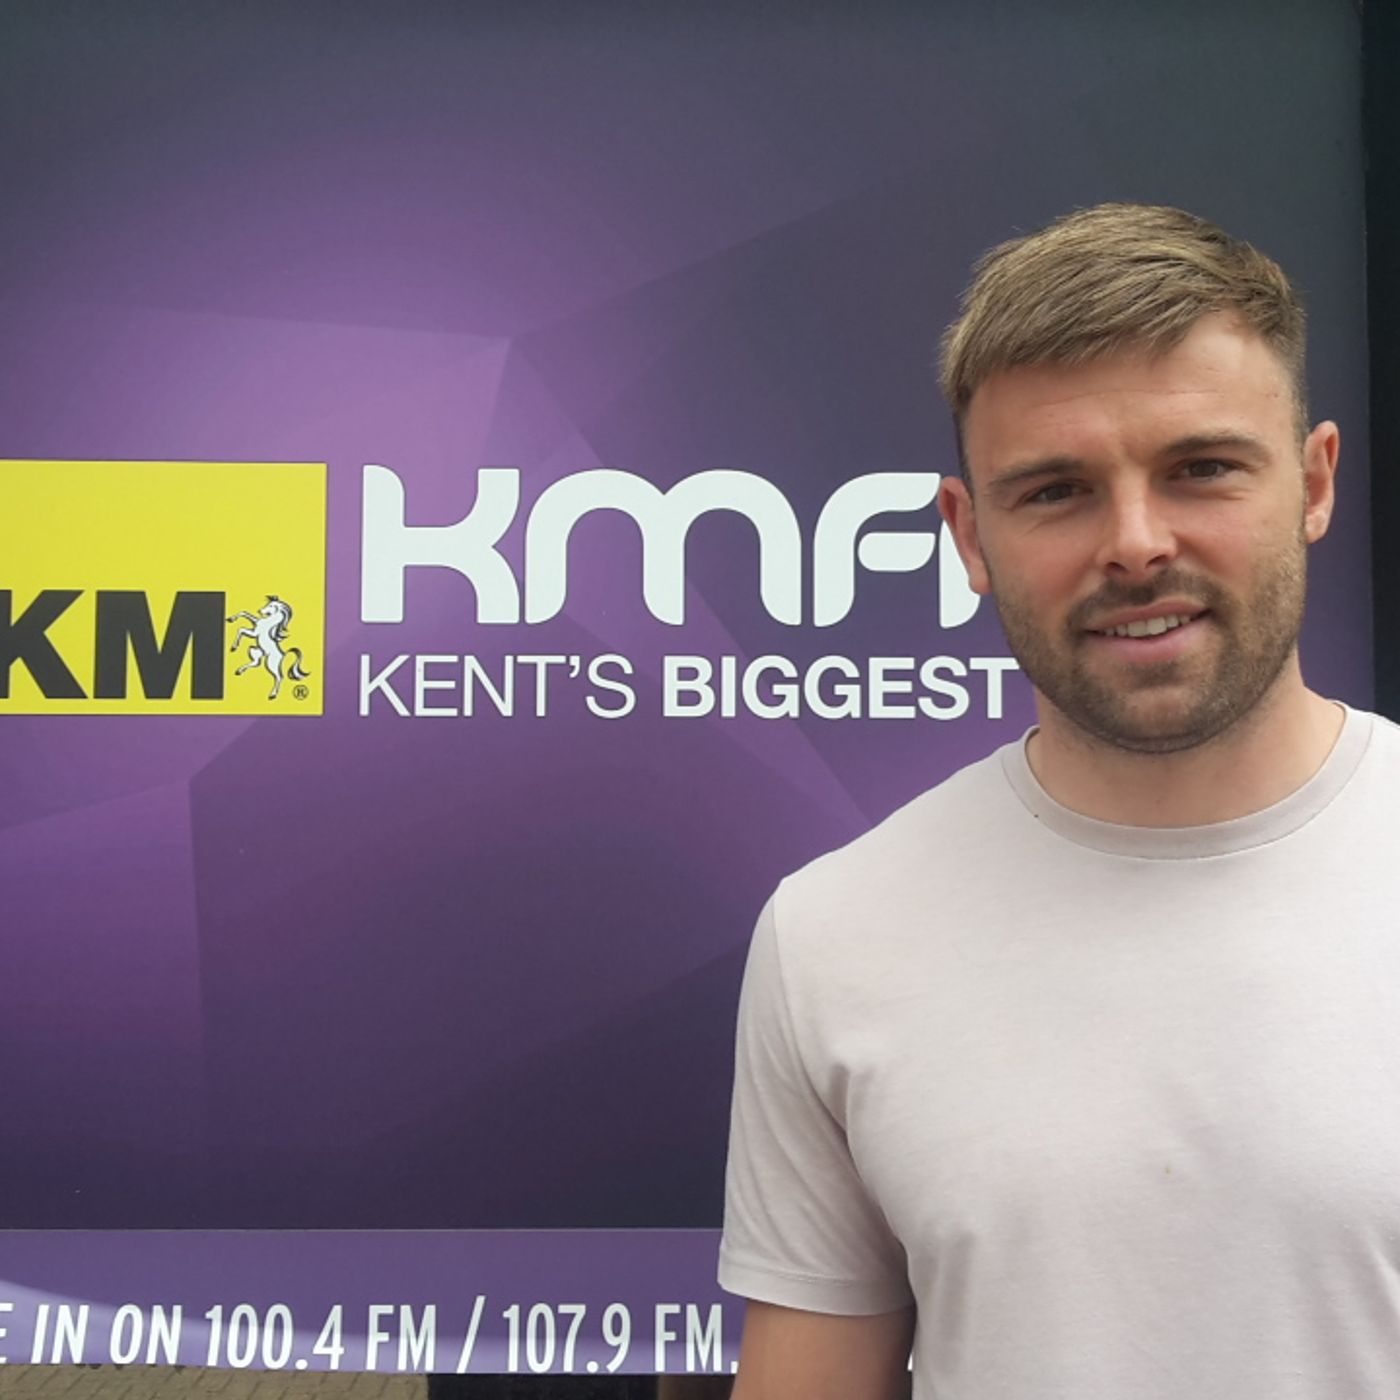 34: Matt Godden joins the KM Sports Team to discuss his rise from non-league to League 1 plus how his mum's terminal cancer is driving him forward